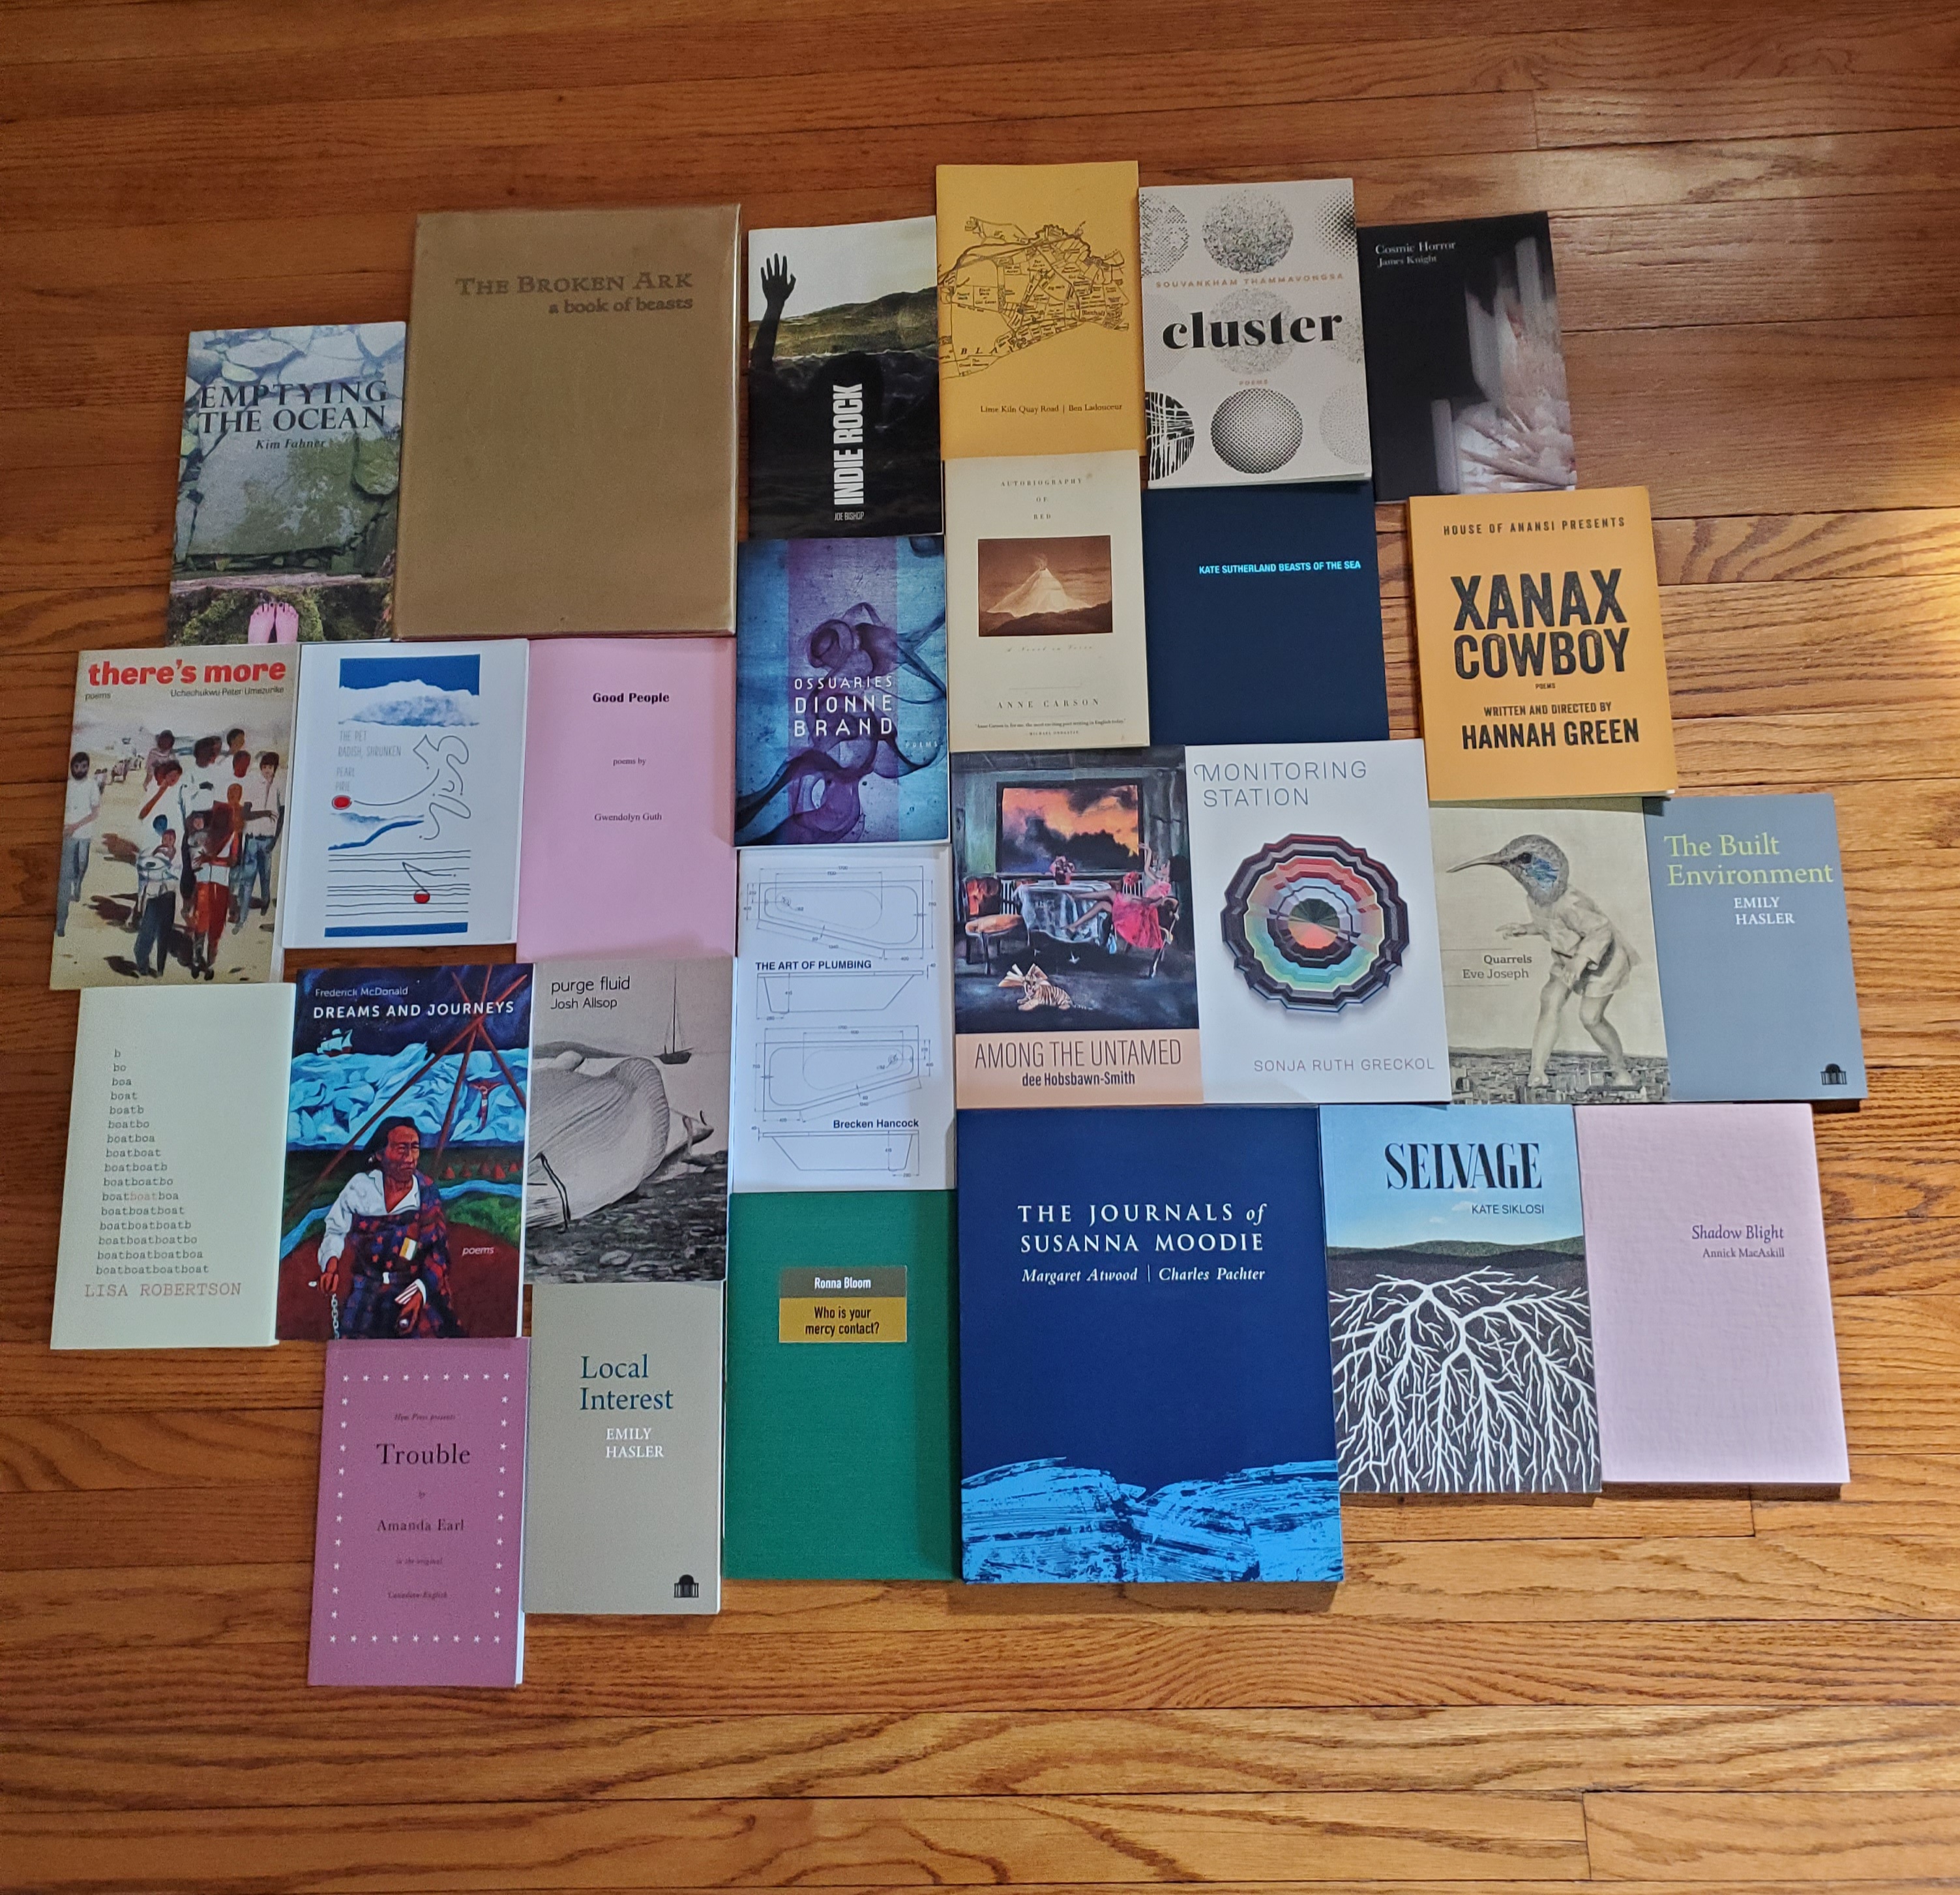 Poetry books (approximately 25-30) laid out in a tiled fashion on a wooden floor - including works by Kim Fahner, Ronna Bloom, Margaret Atwood/Charles Pachter, Amanda Earl and many more